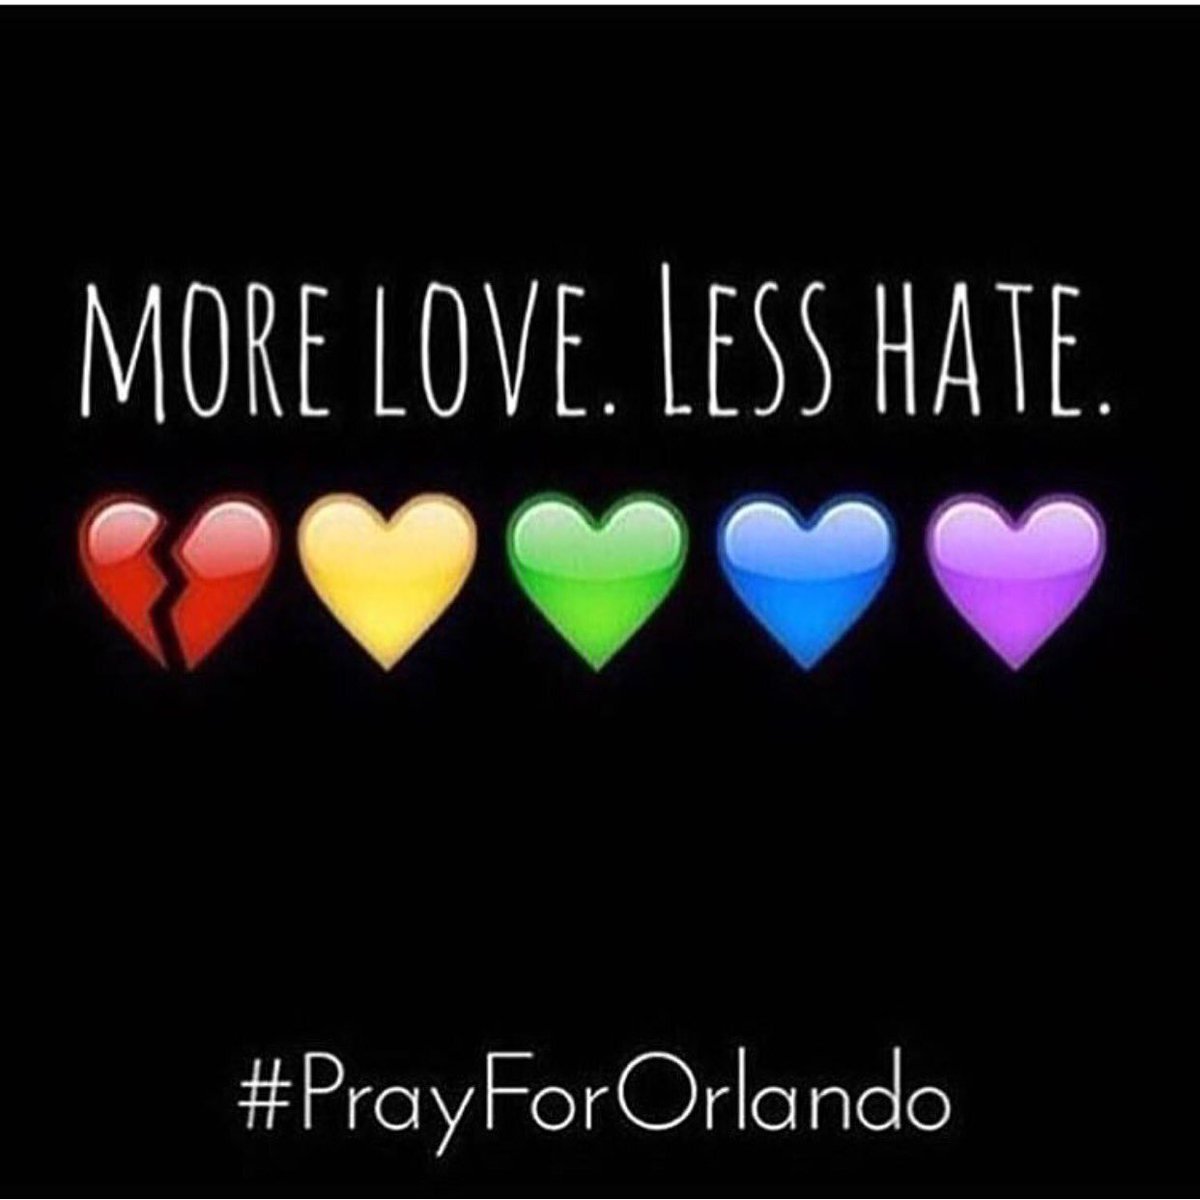 #prayfororlando My heart goes out to all the families and friends. https://t.co/y19k5fXKpR